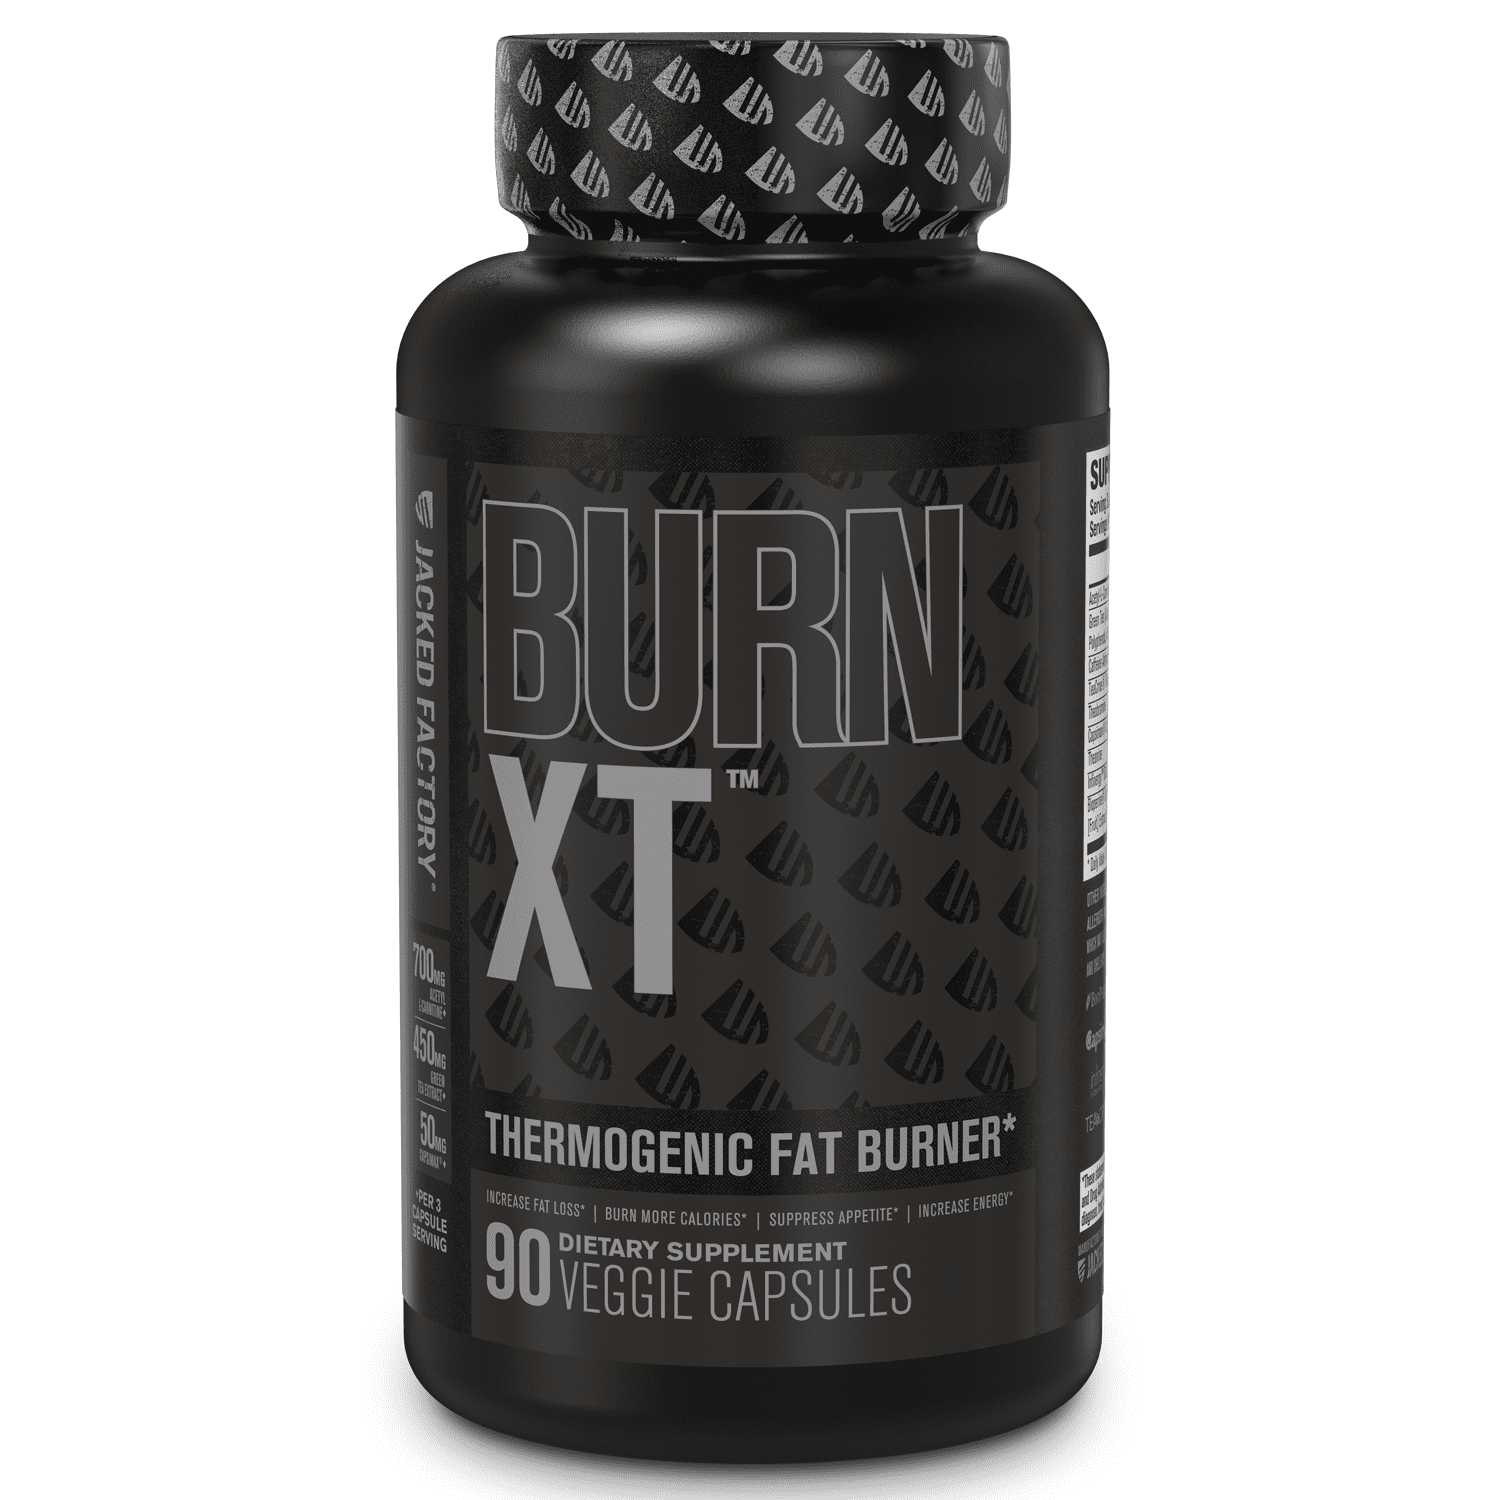 Jacked Factory Burn XT Black Thermogenic Fat Burner - Weight Loss Supplement, Appetite Suppressant, Nootropic Energy Booster - 90 Veg Diet Pills